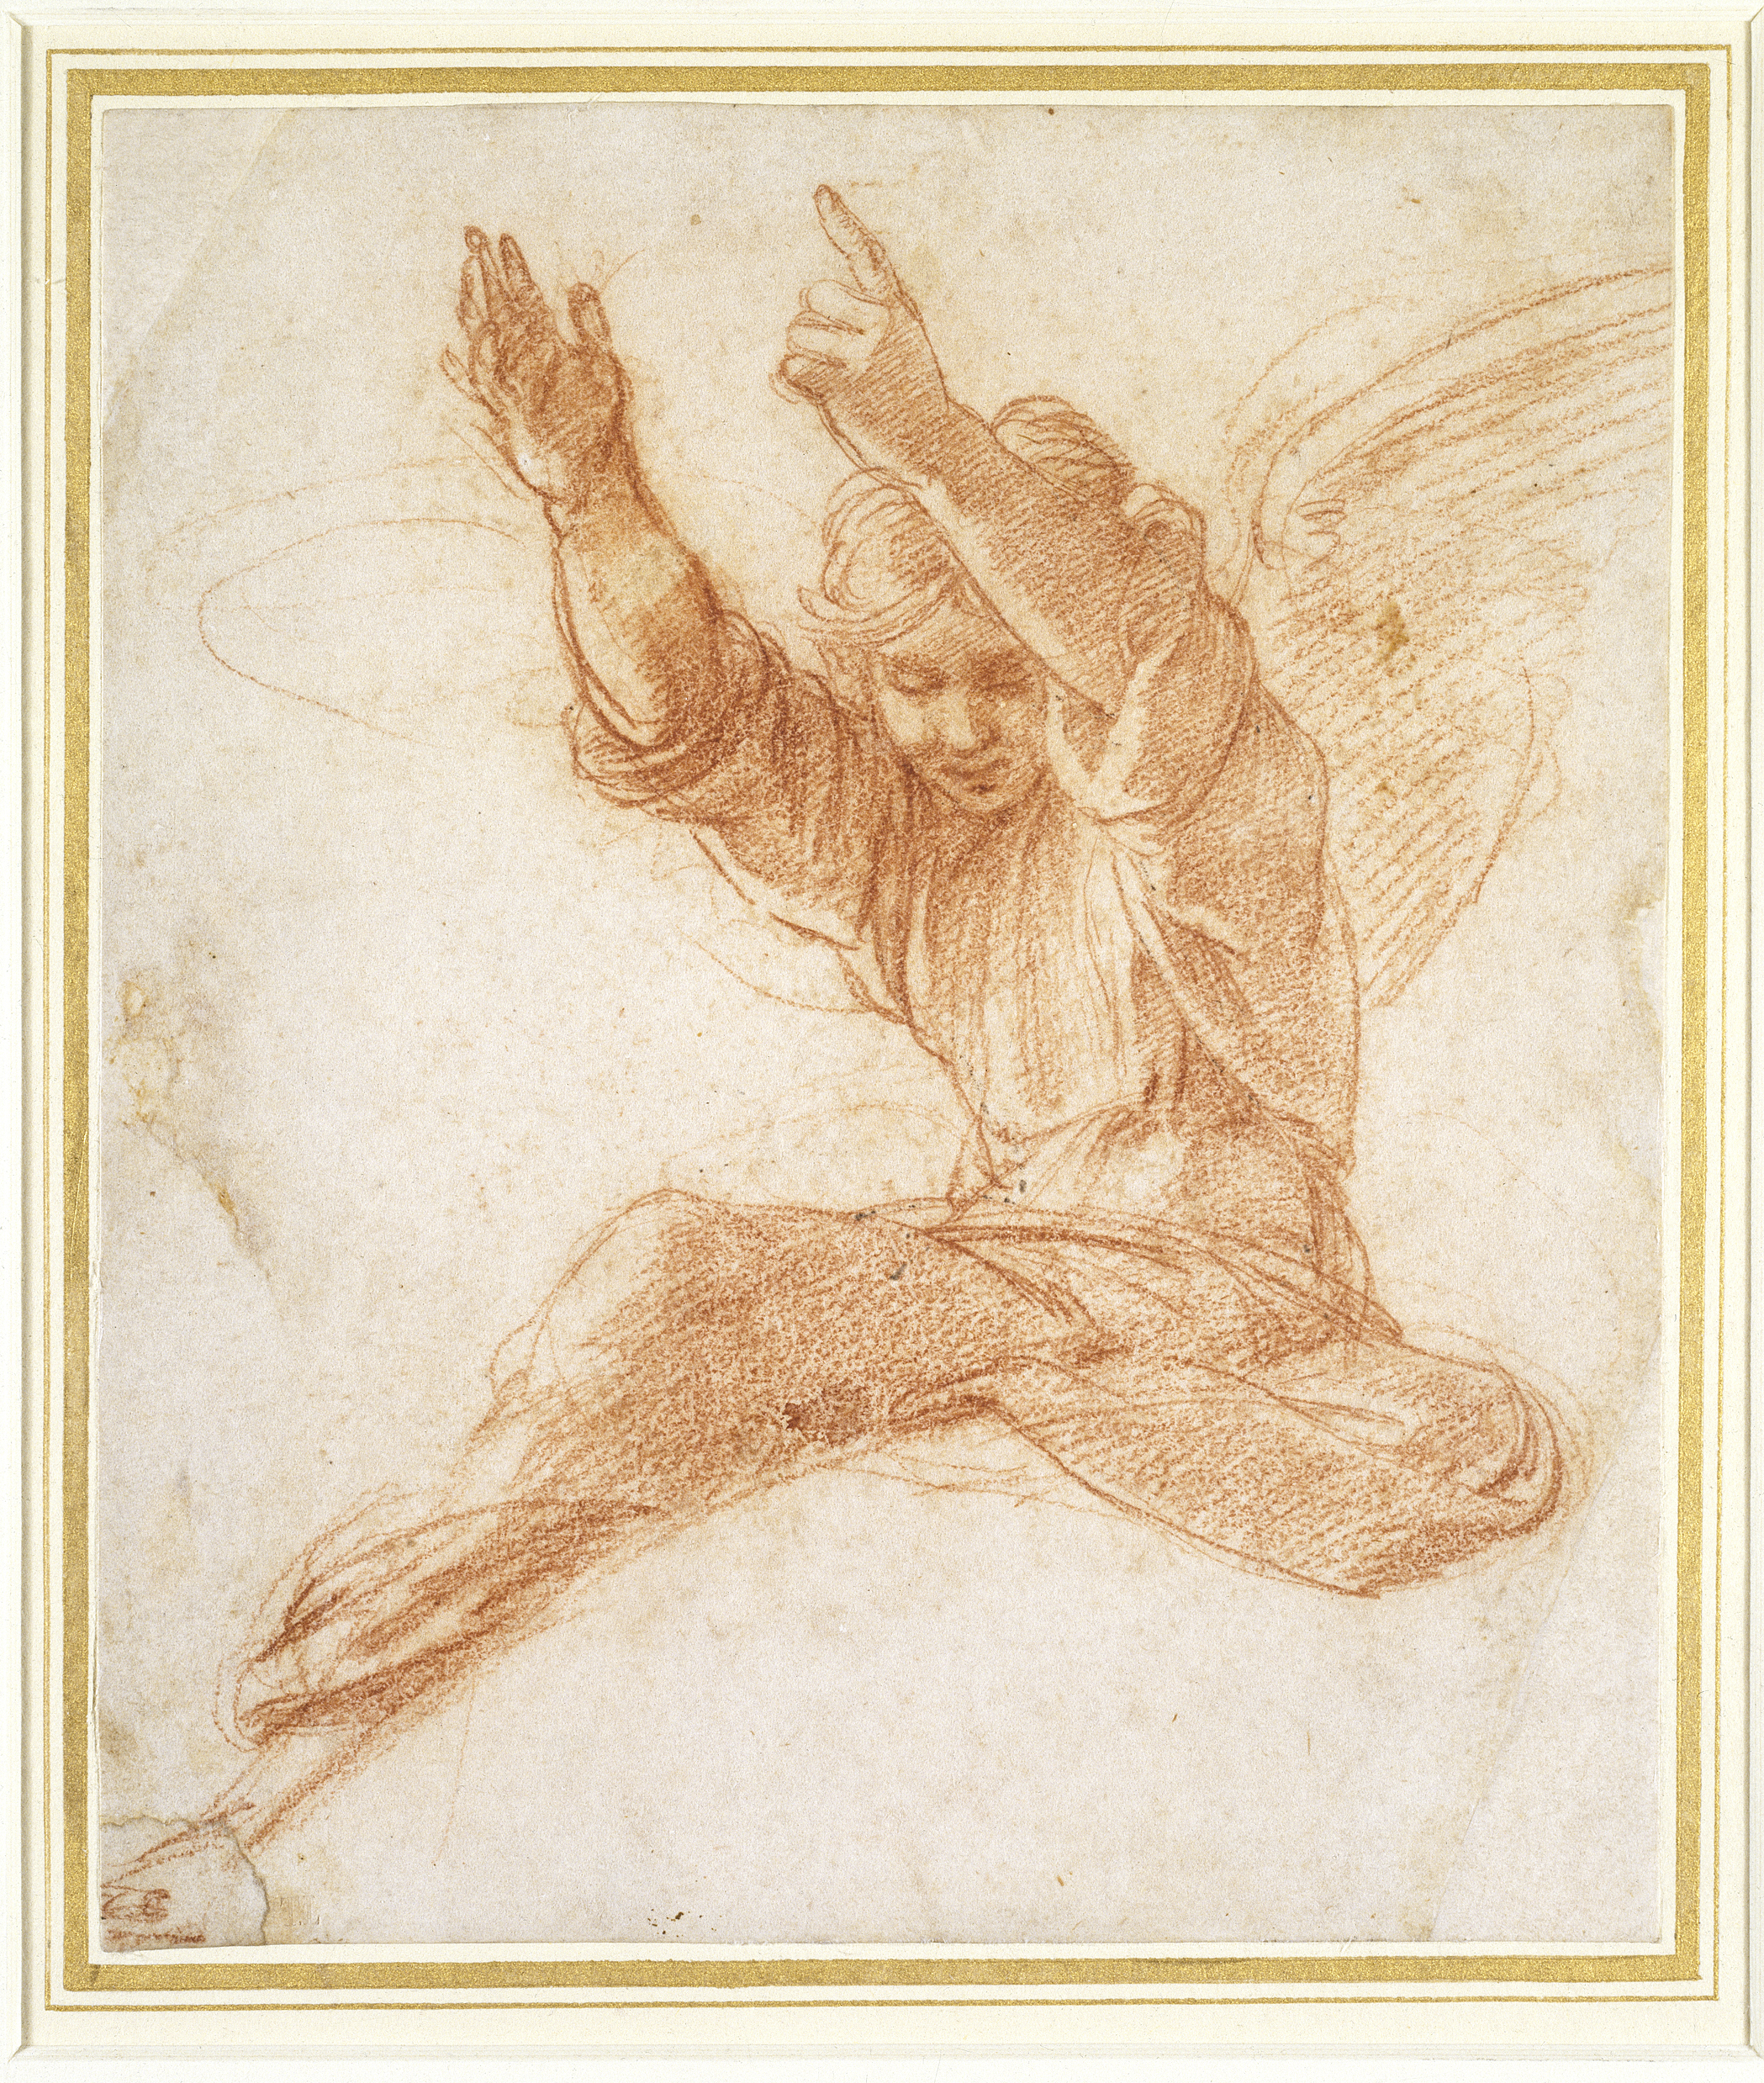 Raphael, An Angel, Pen and brown ink over geometrical indications in blind stylus, 17.9 × 20.6 cm, The Ashmolean Museum, University of Oxford, © Ashmolean Museum, University of Oxford